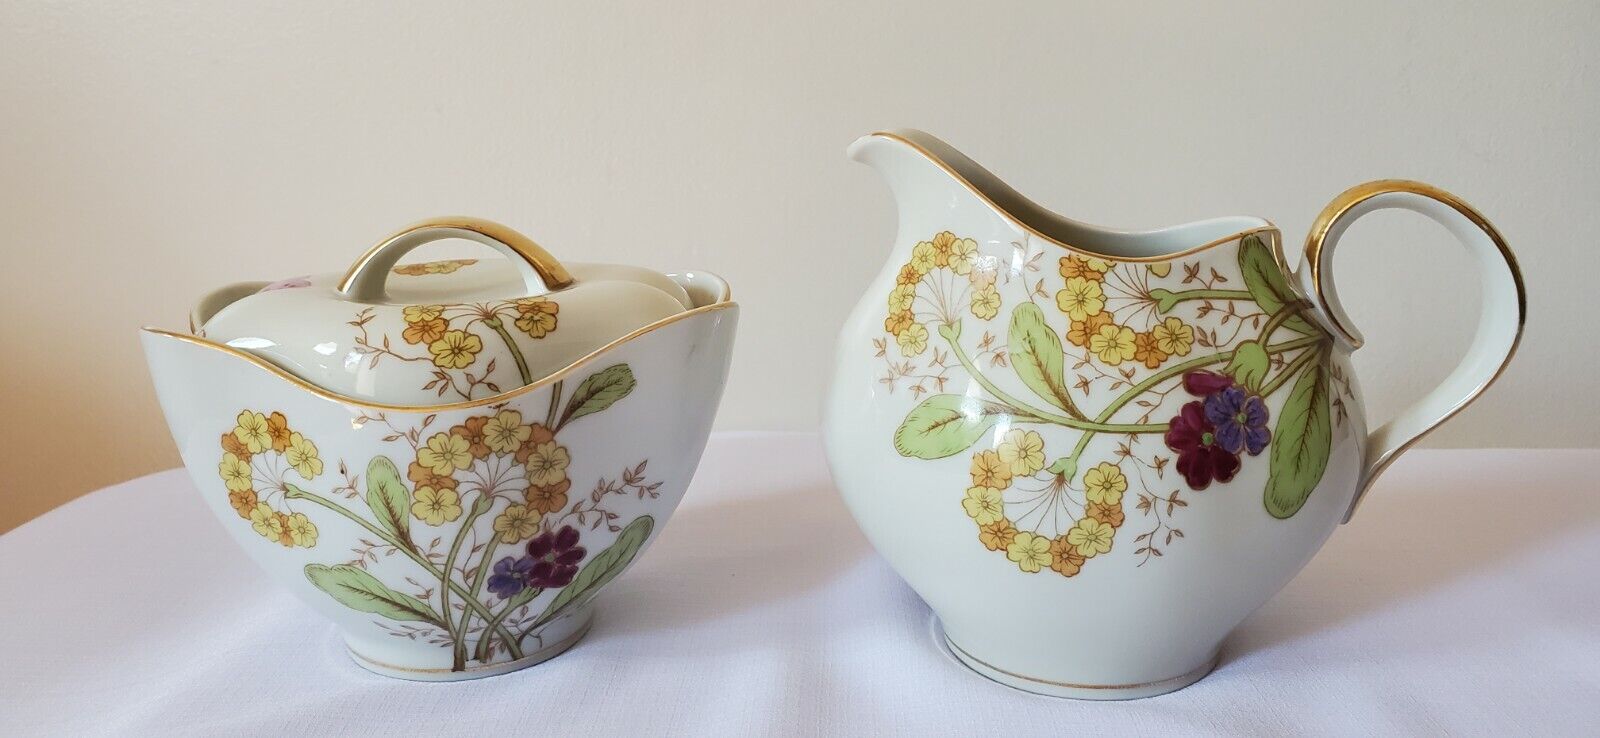 Meito Norleans Fairfield China Creamer and Sugar Bowl 